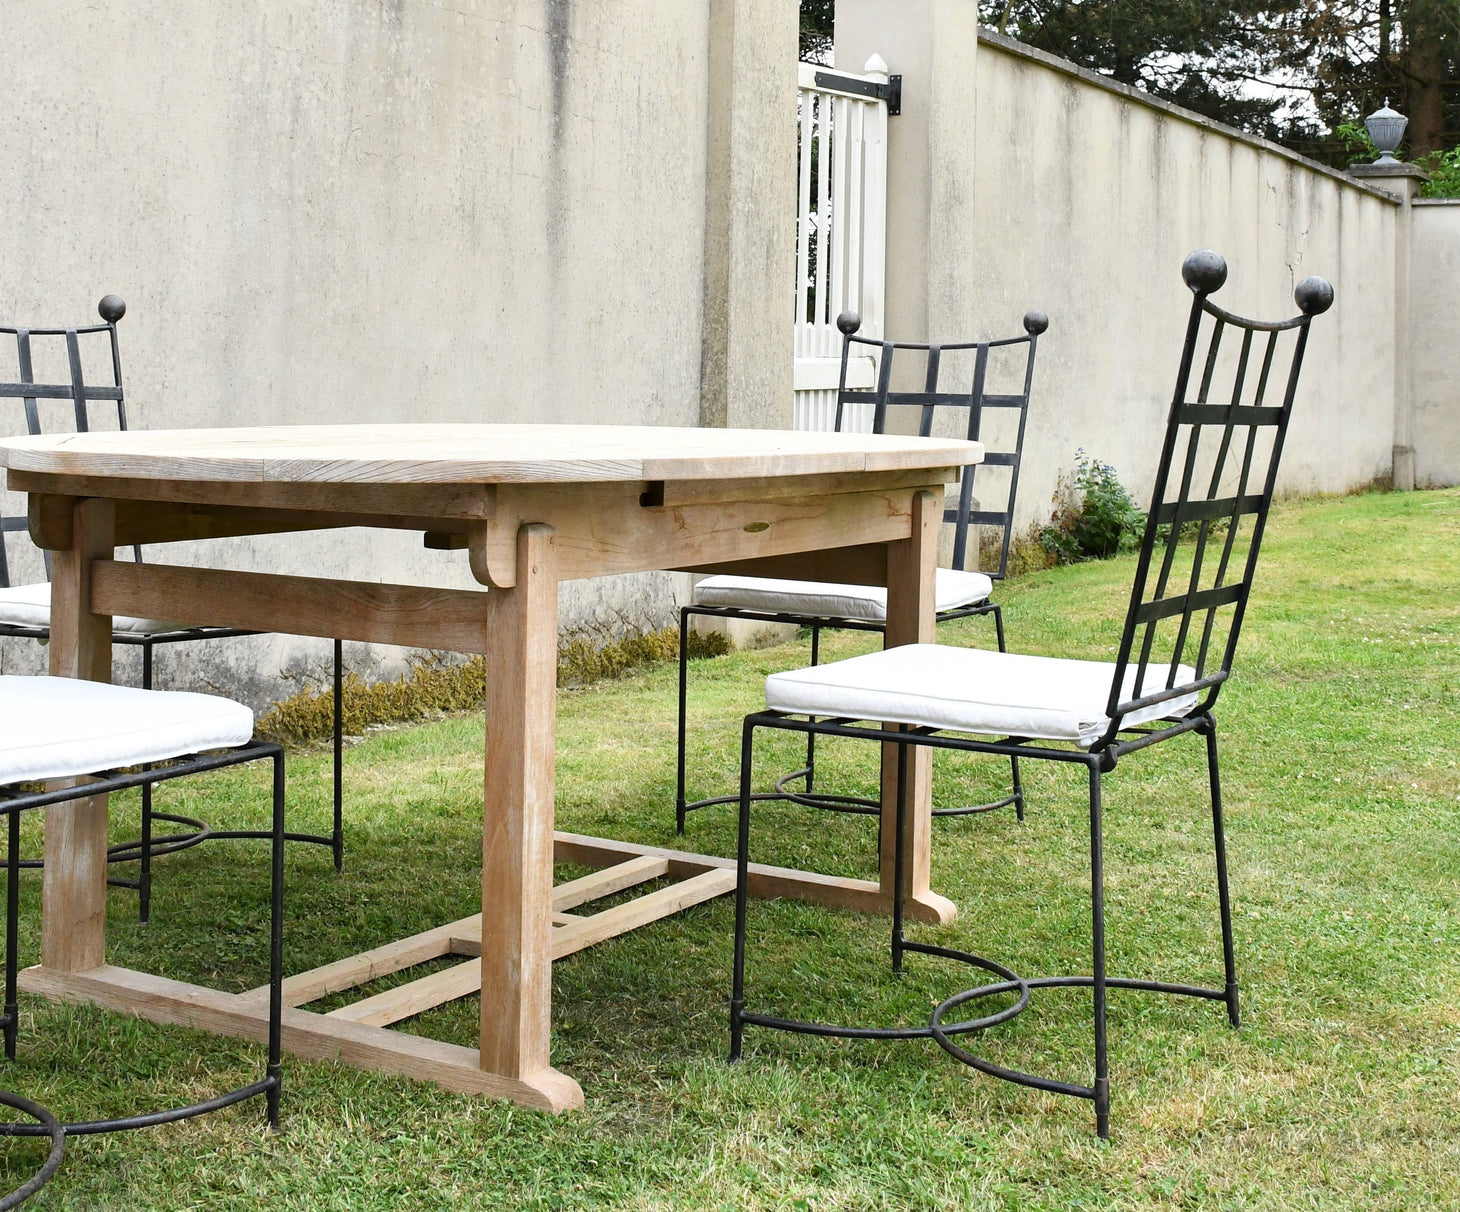 4 x Heveningham Garden Chairs and Winchester Teak Table